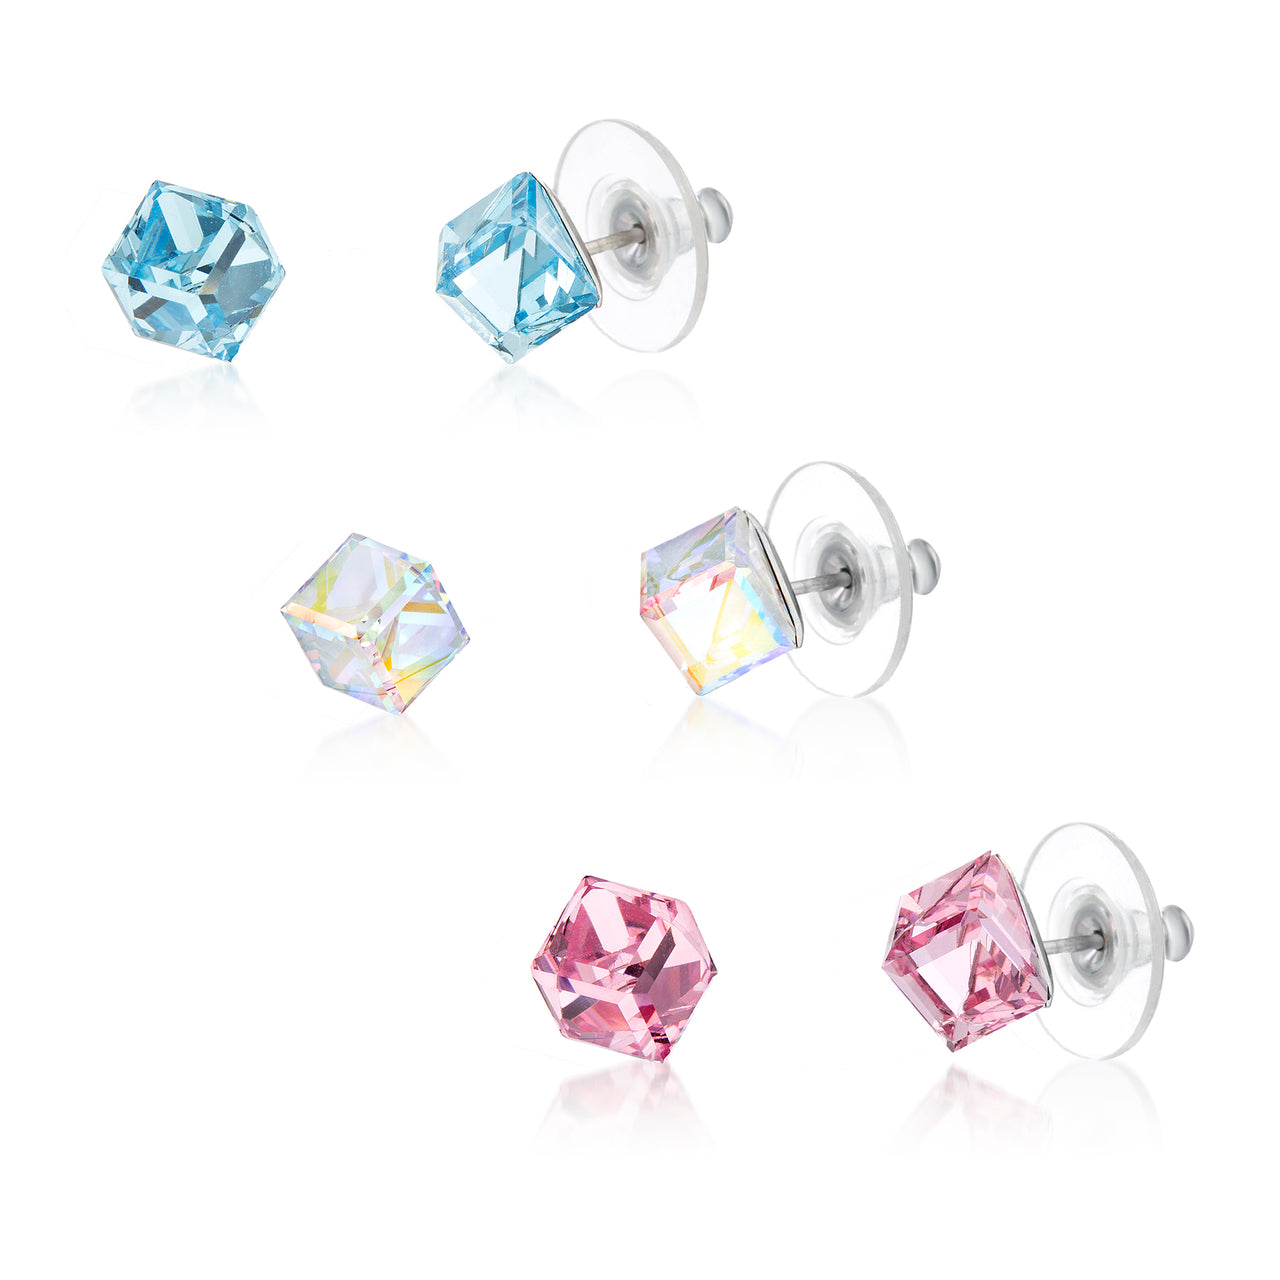 3 pair Cube Earring Set for Women for Women in Stainless Steel made with Swarovski Crystals